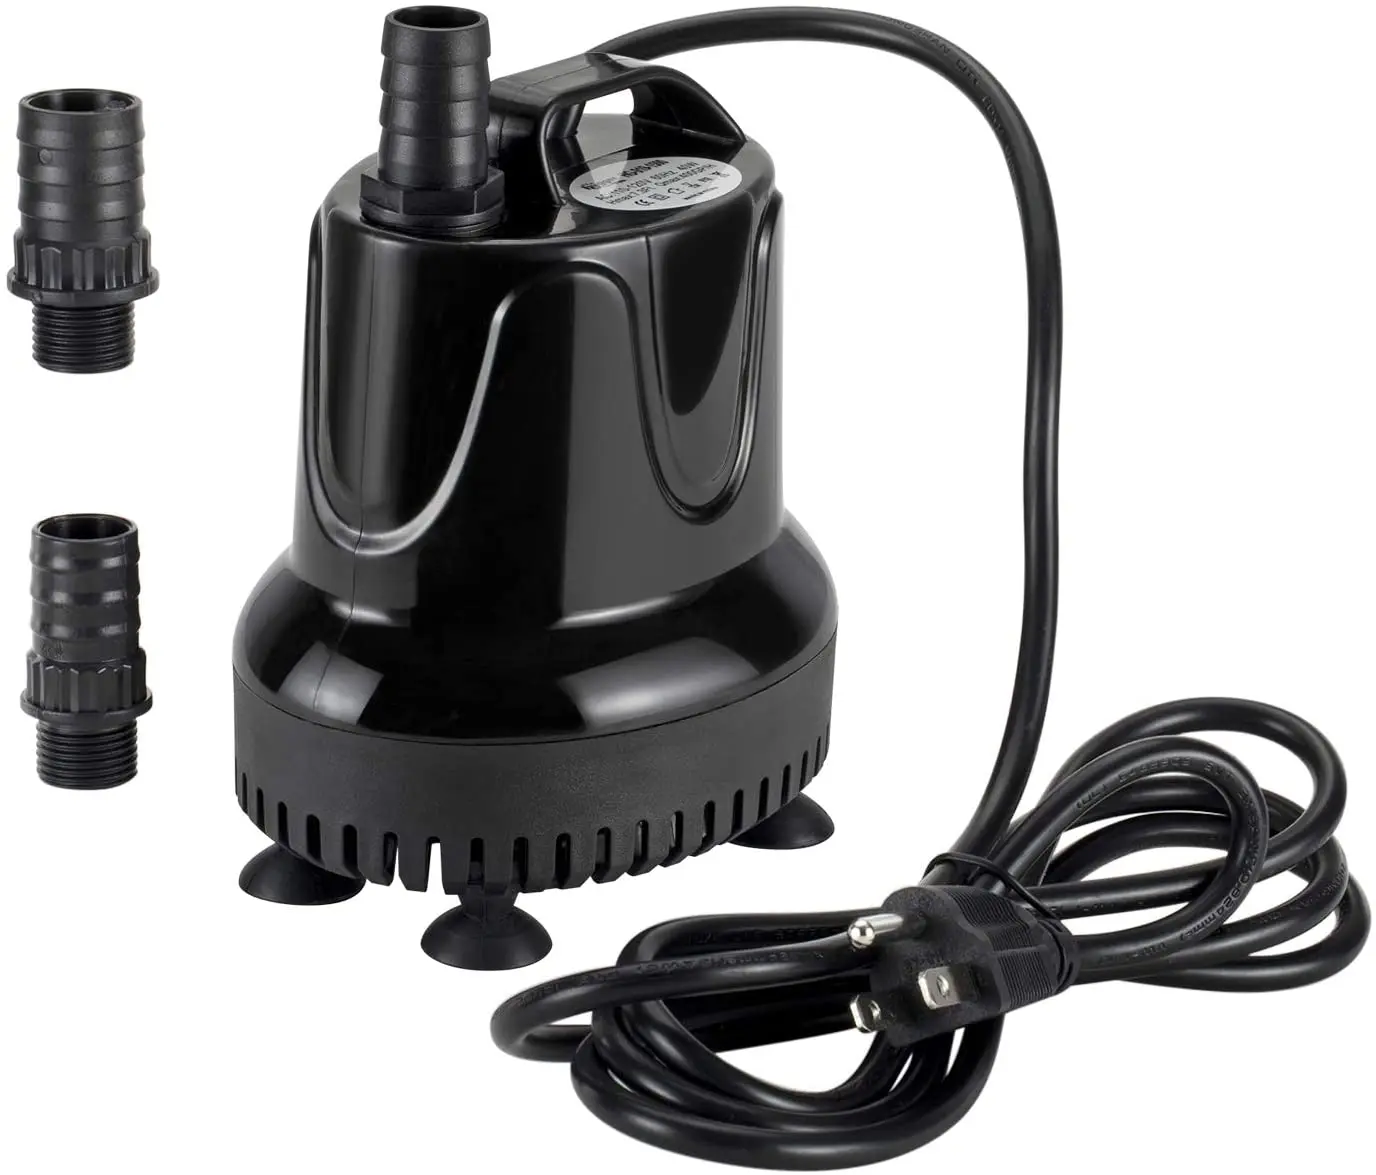 Hygger Quiet Aquarium Water Pump for Water Removal Change Cleaning Inline Submersible Fish Tank Pump for Waterfall Fountain with Adaptors 215-1060 GPH 